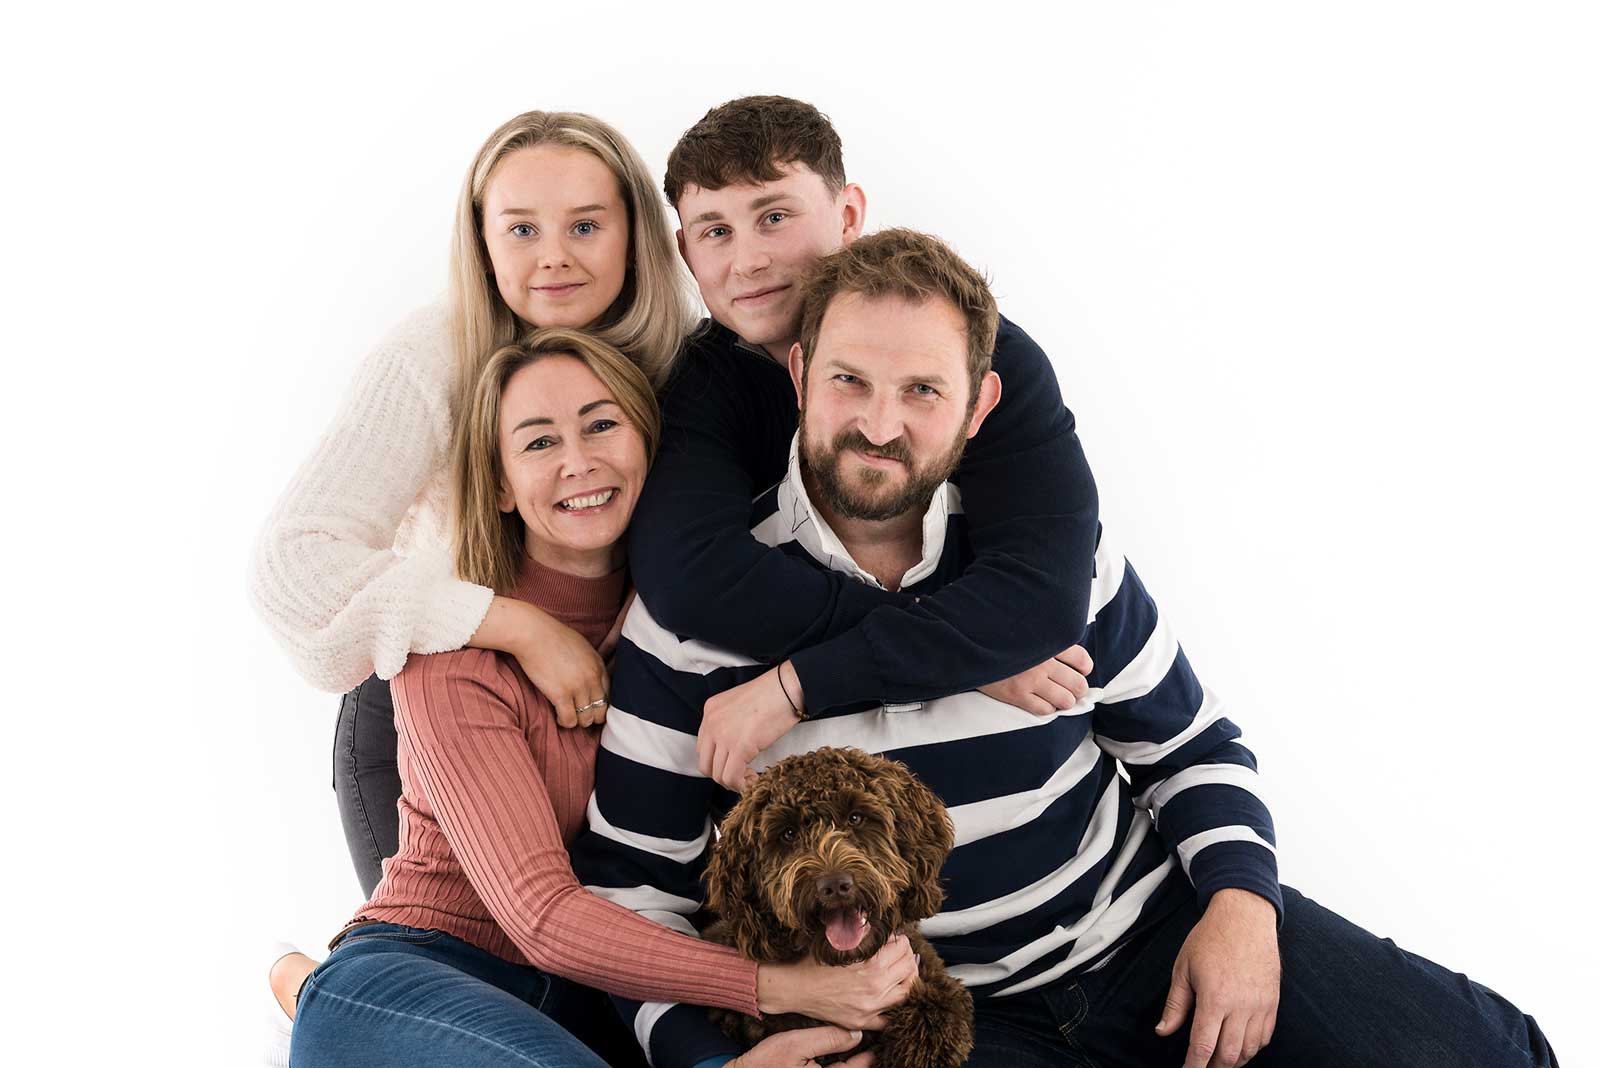 Family of 4 and a dog having a family portrait taken in a photography studio on a white background